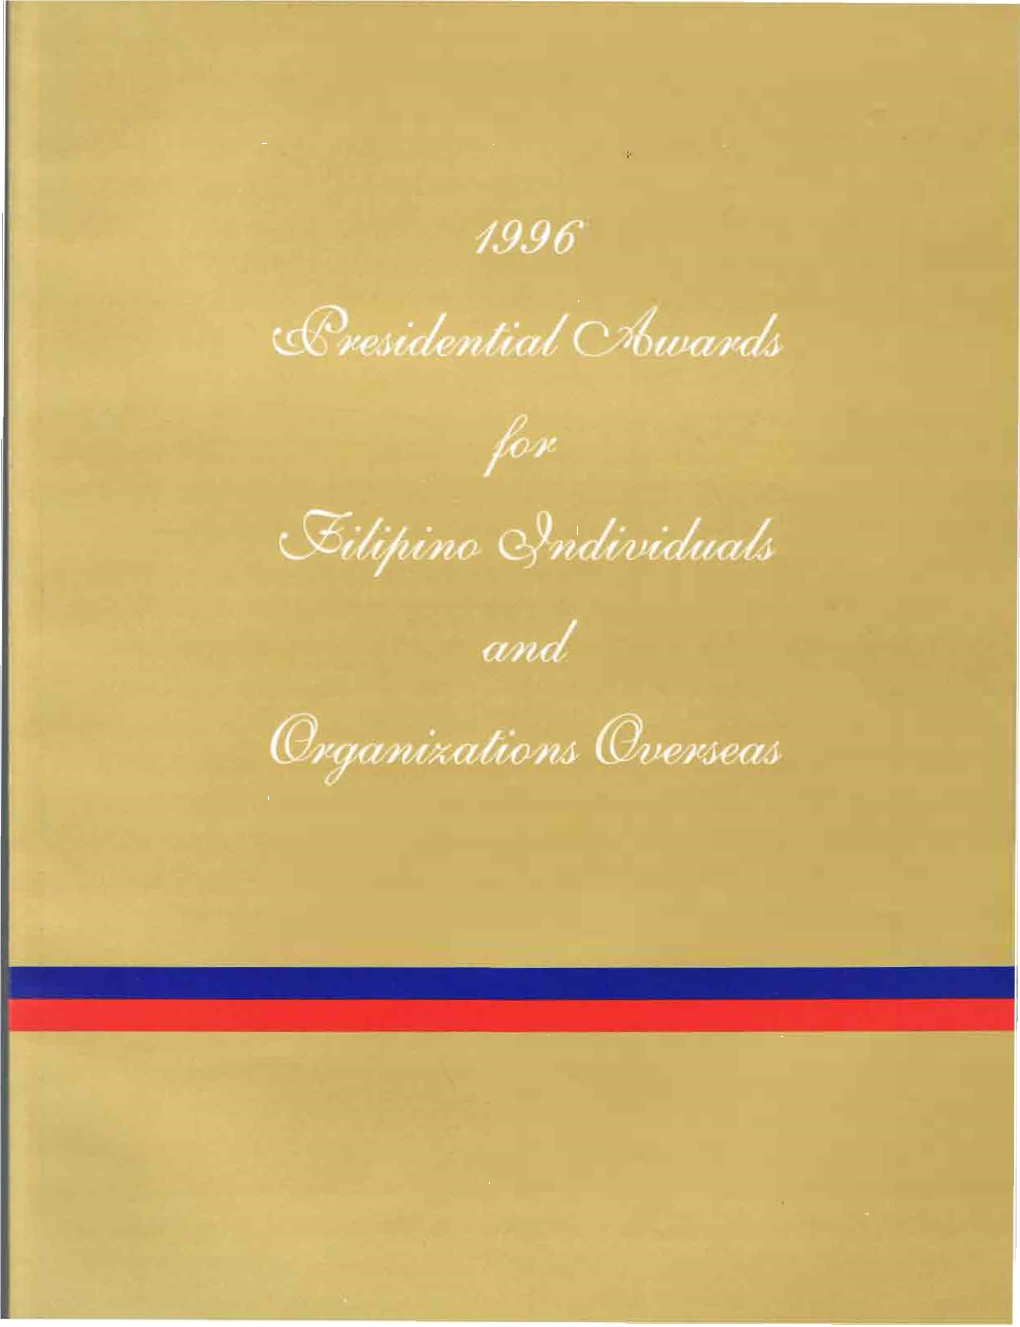 1996 Presidential Awards for Filipino Individuals and Organizations Overseas Highlights the Commemoration of the Month of Overseas Filipinos